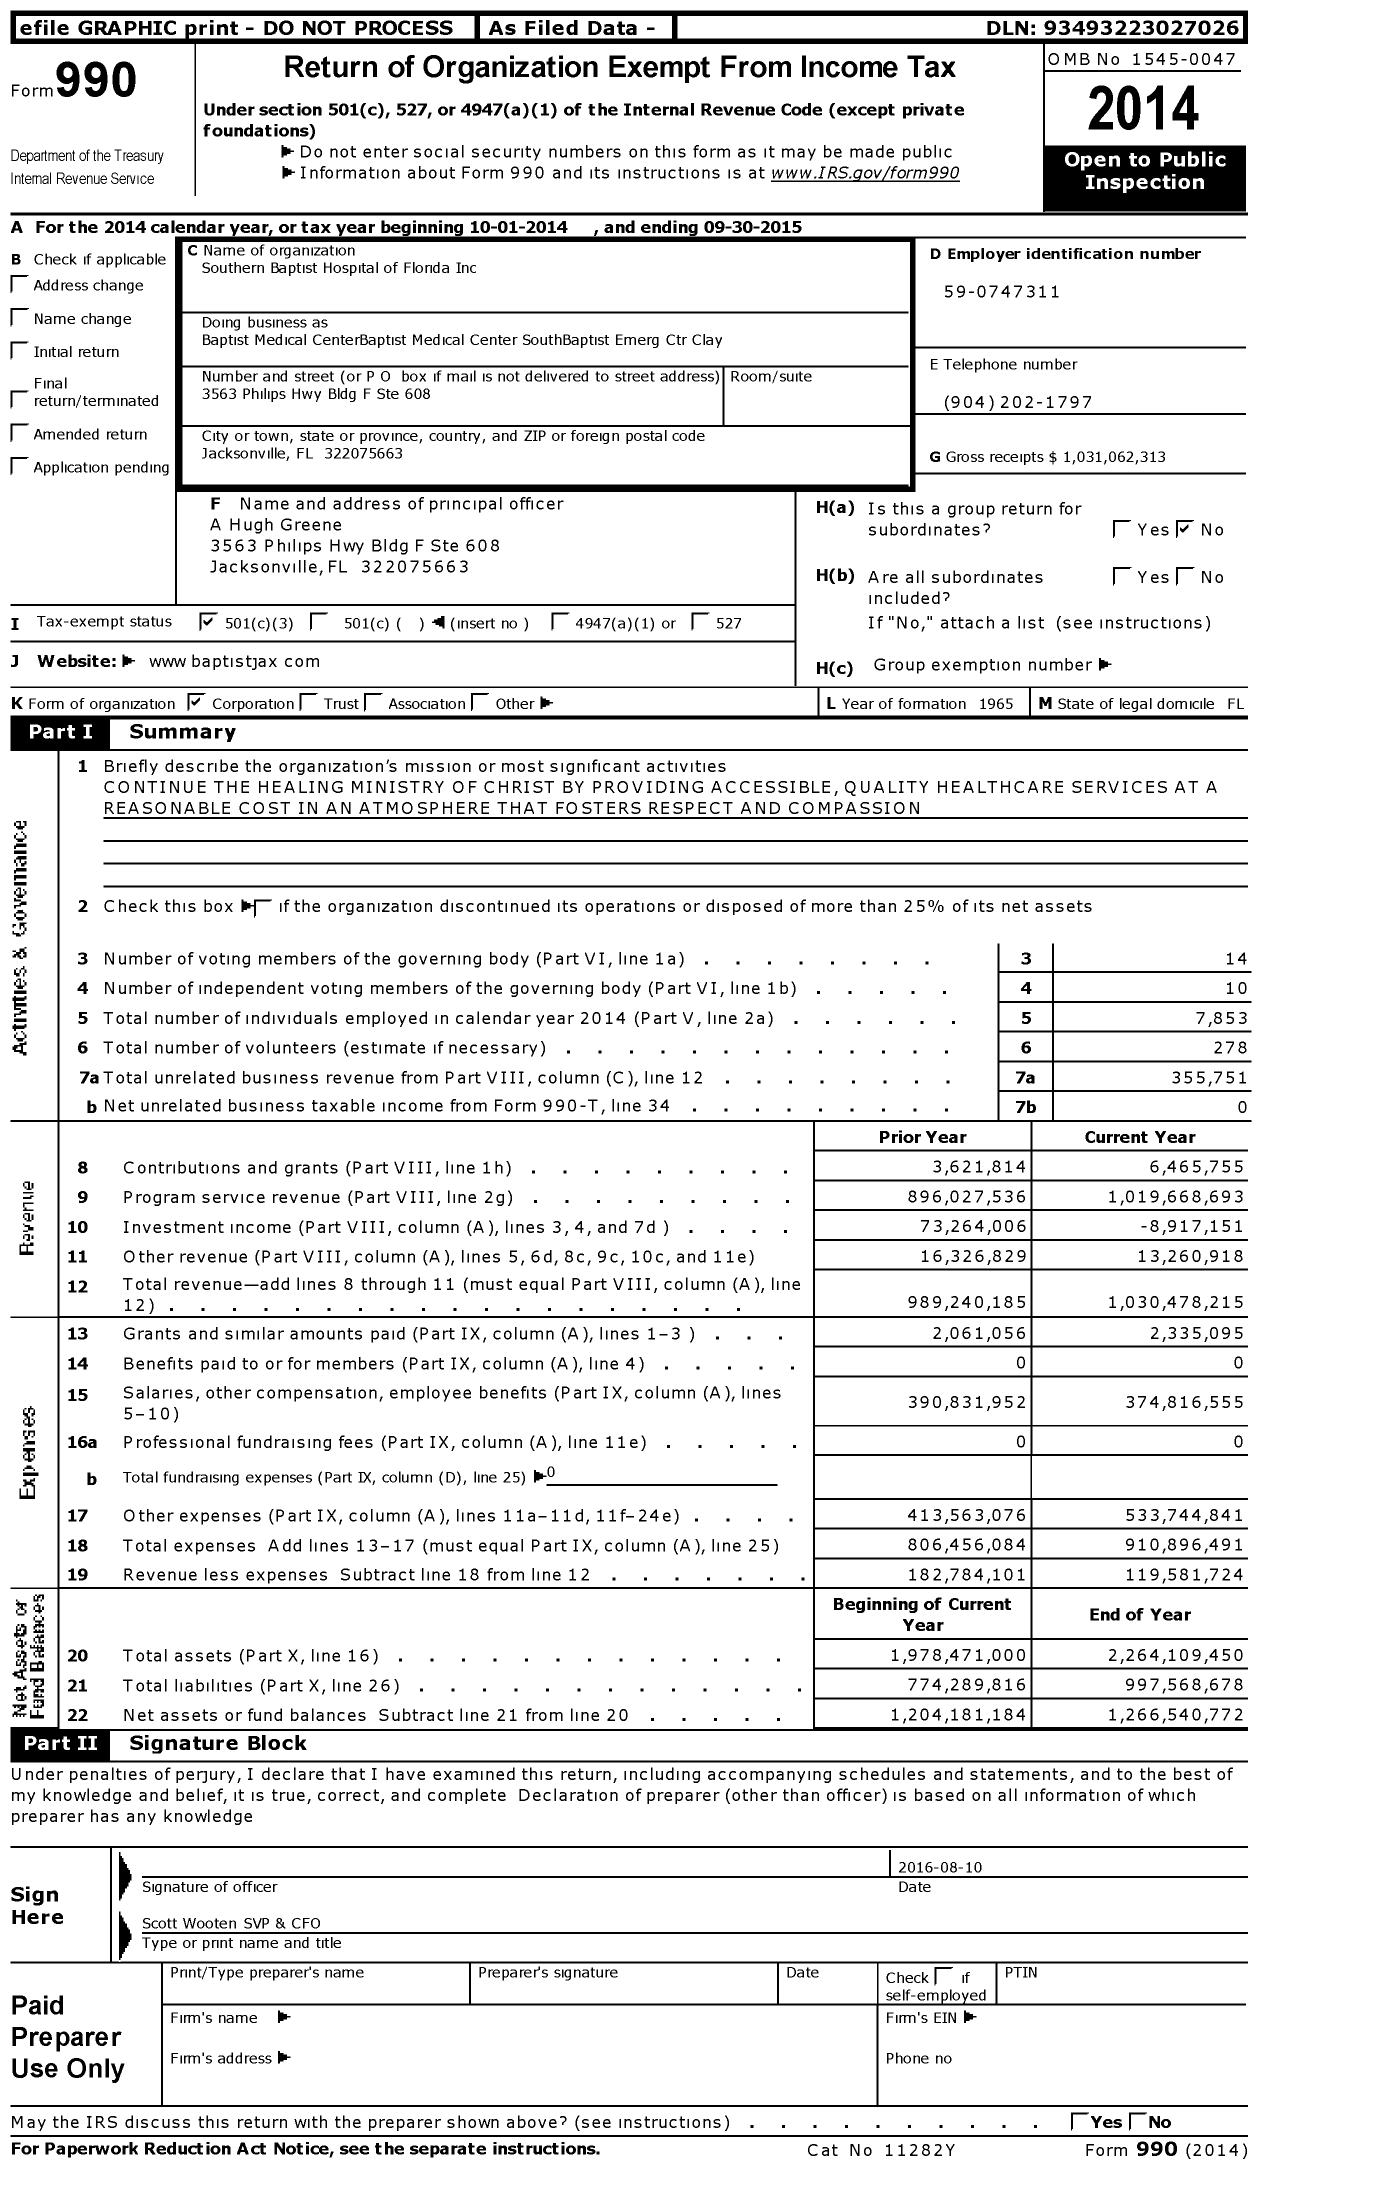 Image of first page of 2014 Form 990 for Southern Baptist Hospital of Florida